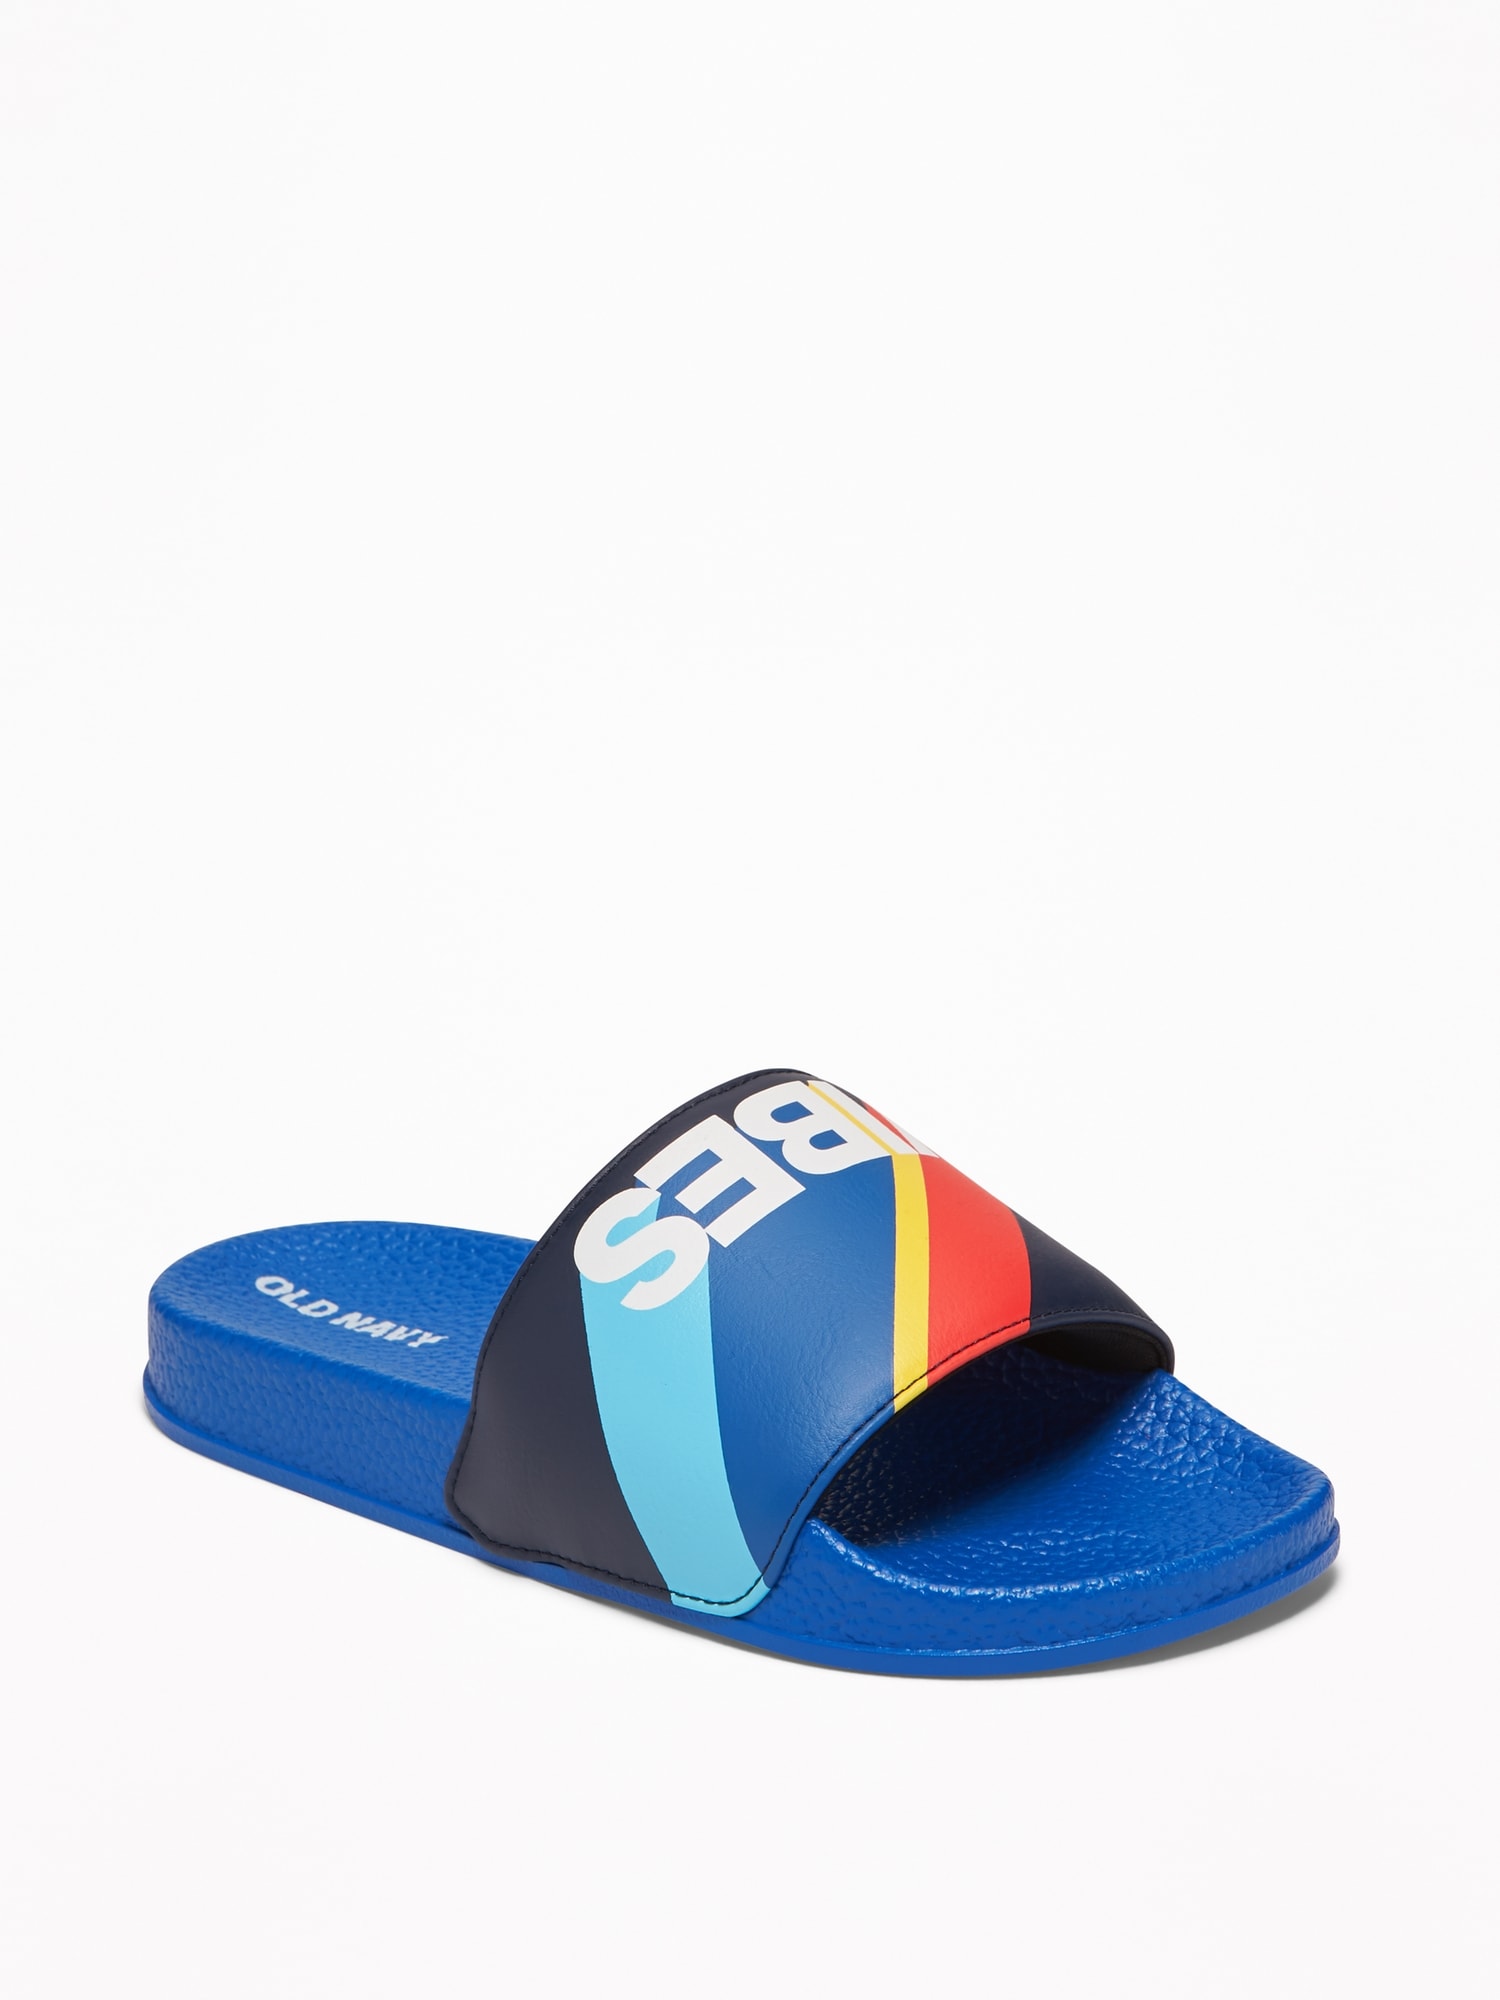 Faux-Leather Pool Slide Sandals for Boys | Old Navy